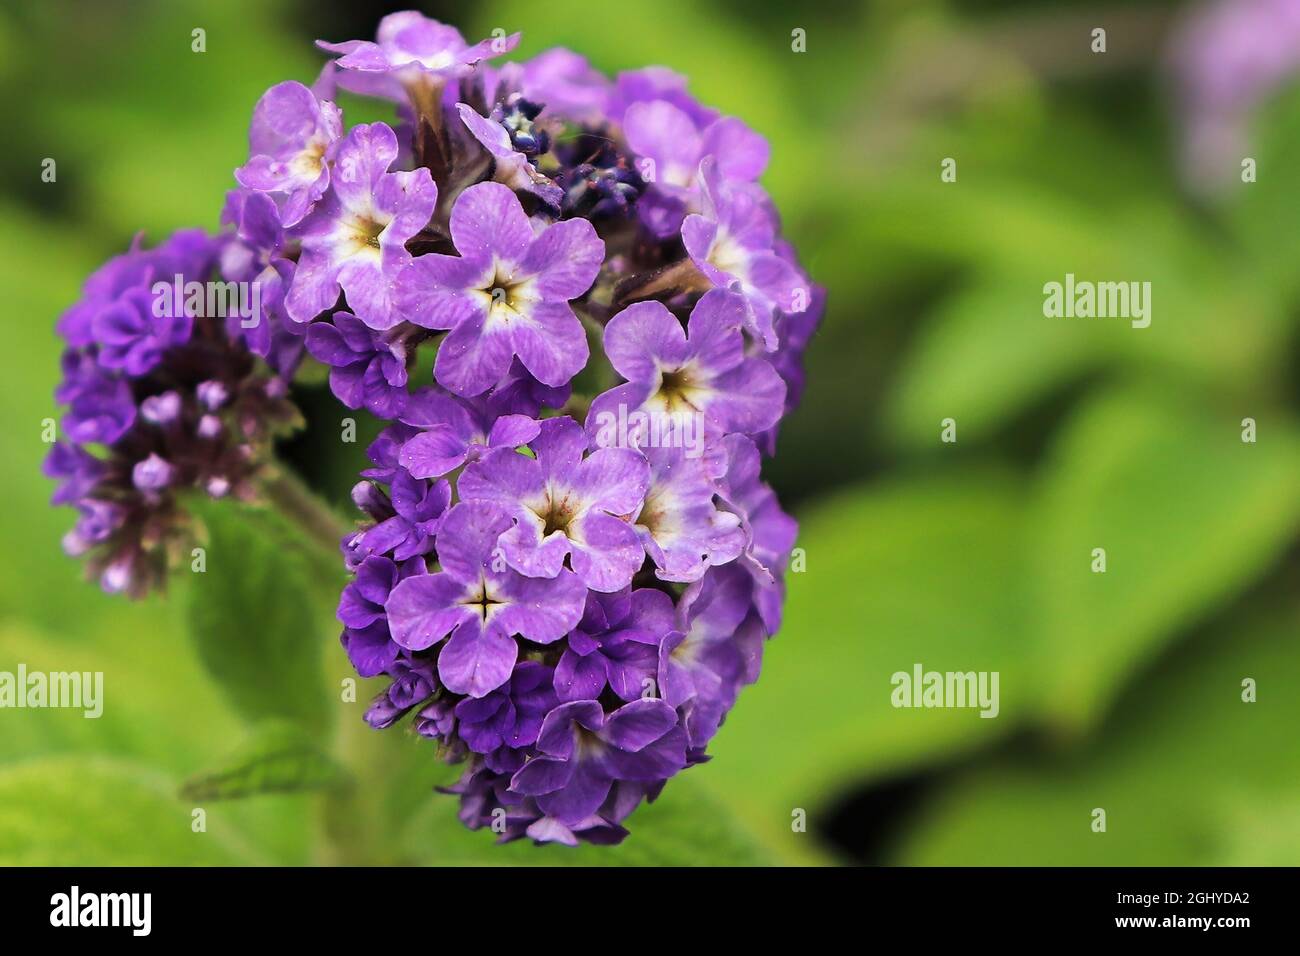 Macro of a puple heliotrope flower cluster with leaves Stock Photo